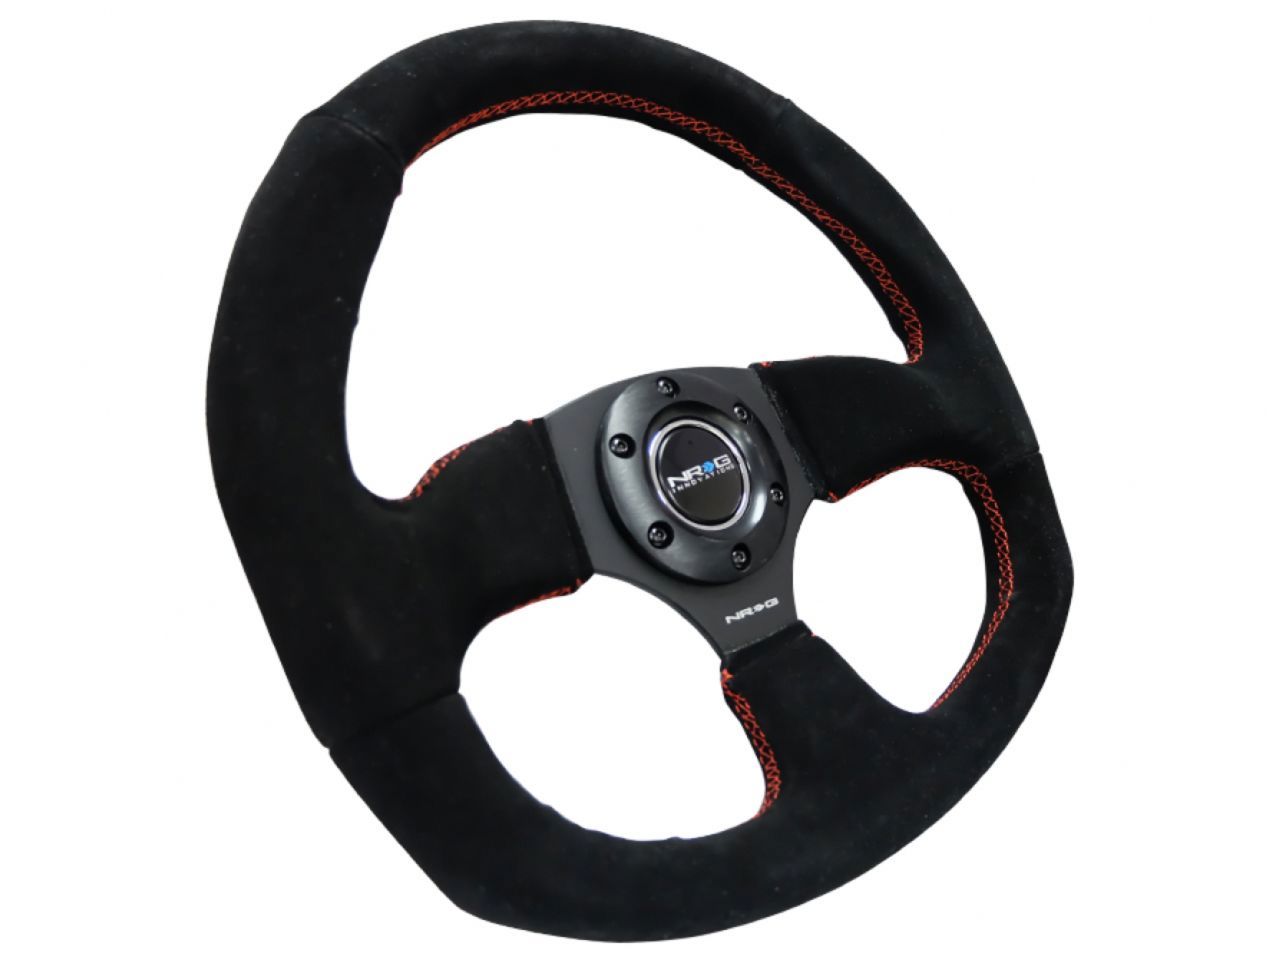 NRG Reinforced Steering Wheel - Suede Leather Steering Wheel w/ RED stitch